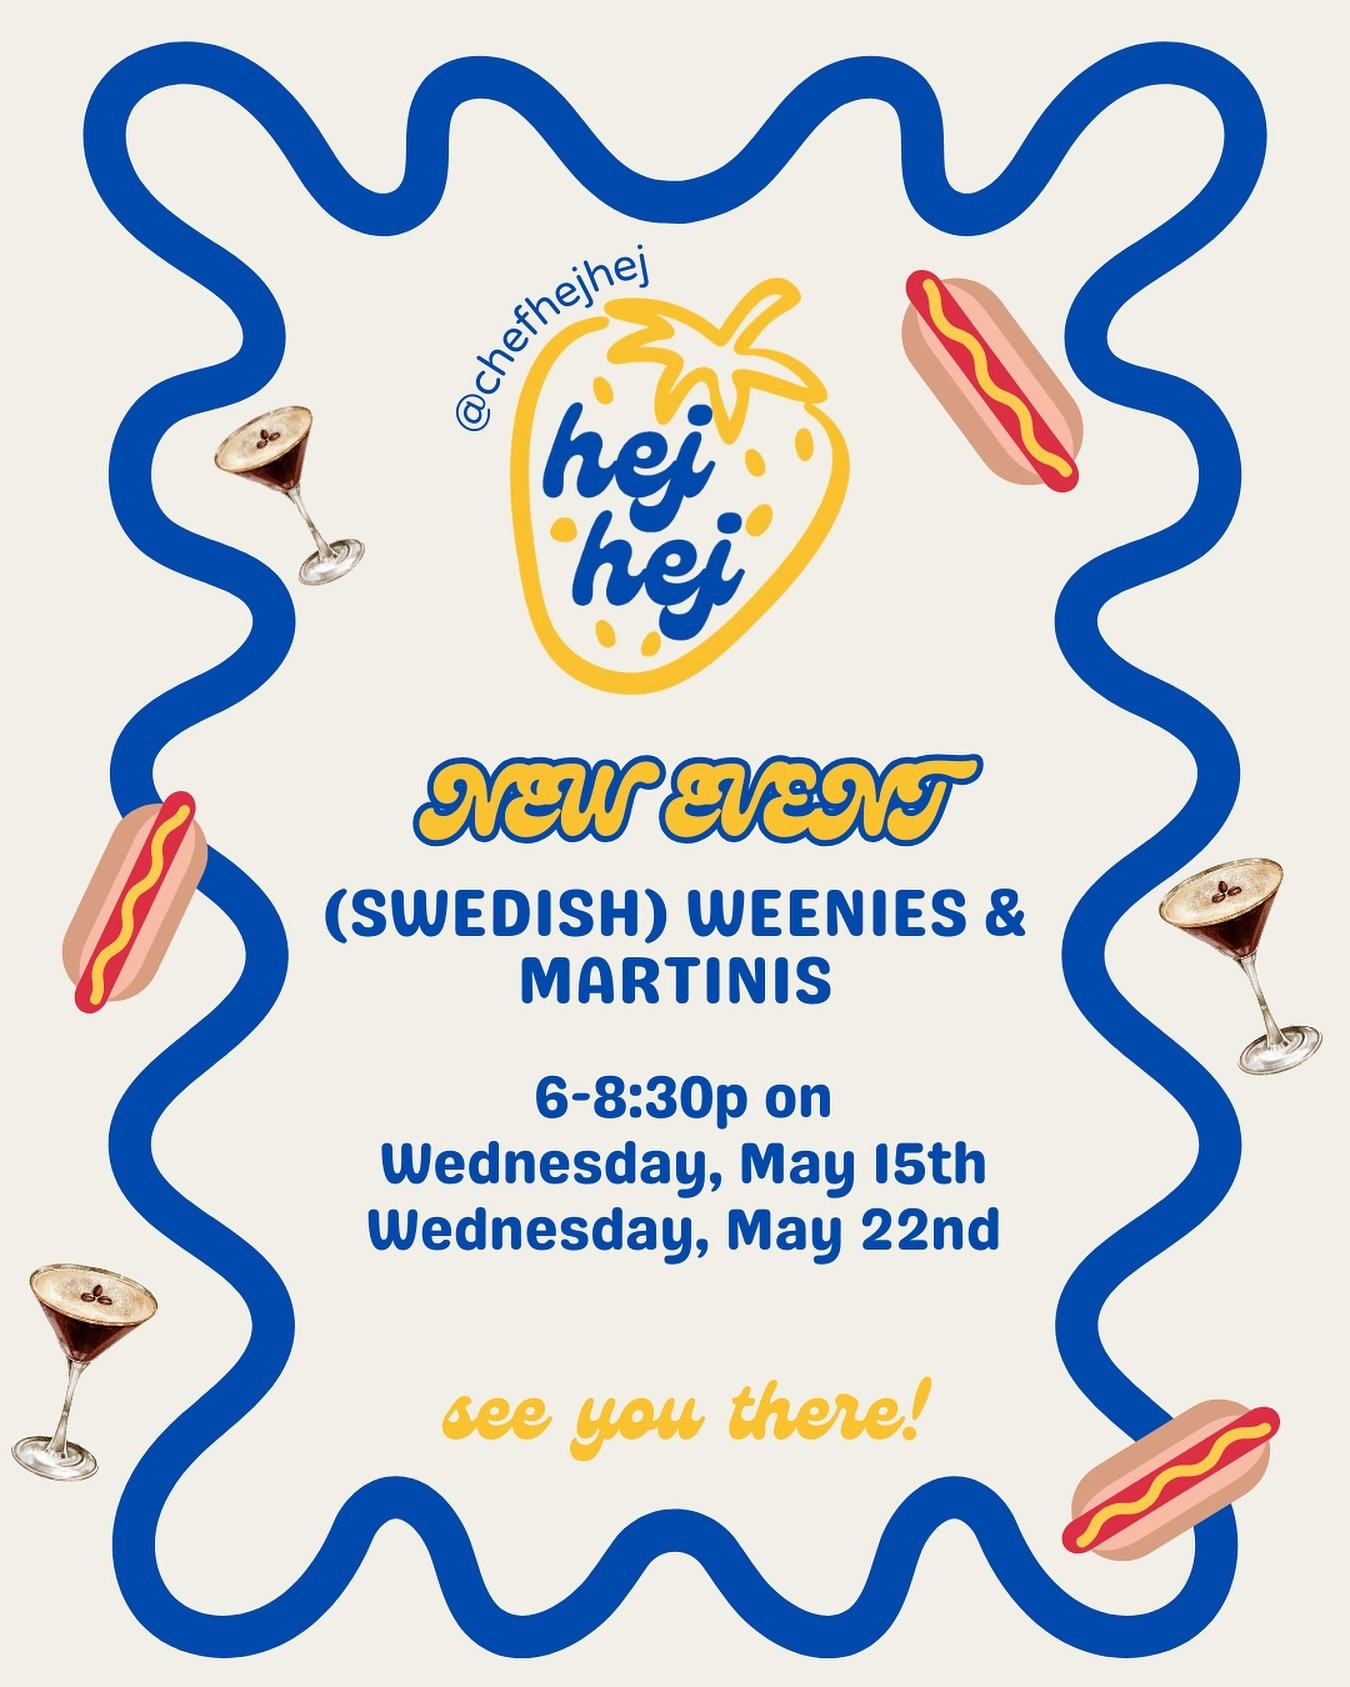 Trying something fun out! Who wants to learn to make (and eat, duh) Swedish hot dogs and cardamom espresso martinis with your friends at my place? 

Opening up two dates to start - must book full space (6 guests total). DM me for more info! 

#weenie